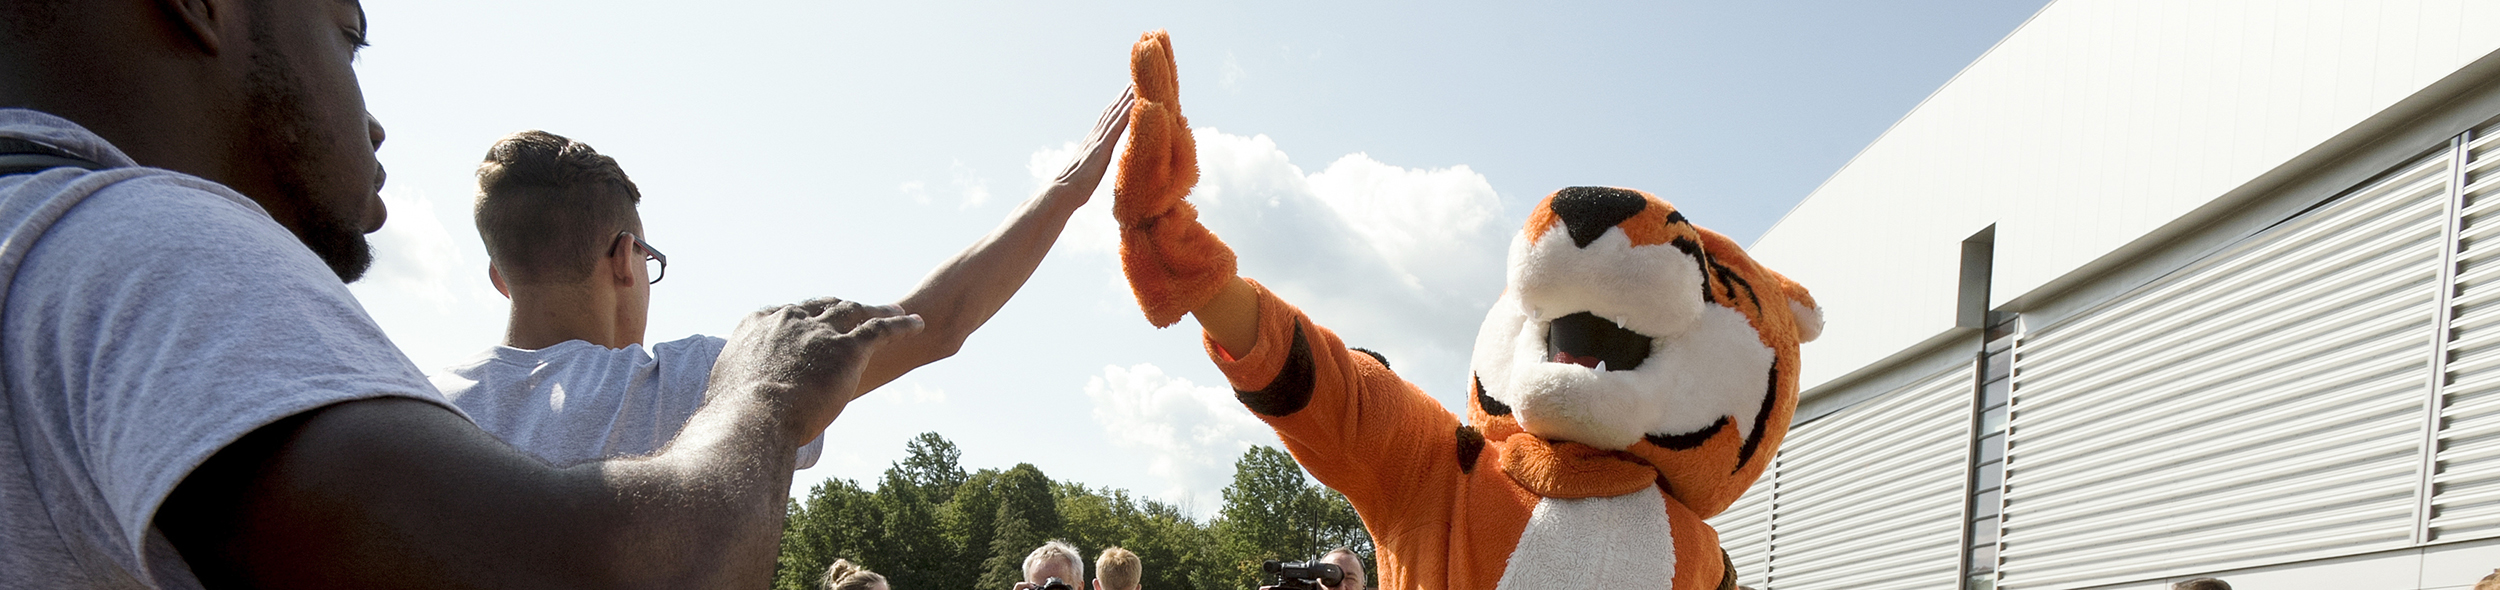 Ritchie the tiger mascot giving high fives to students.